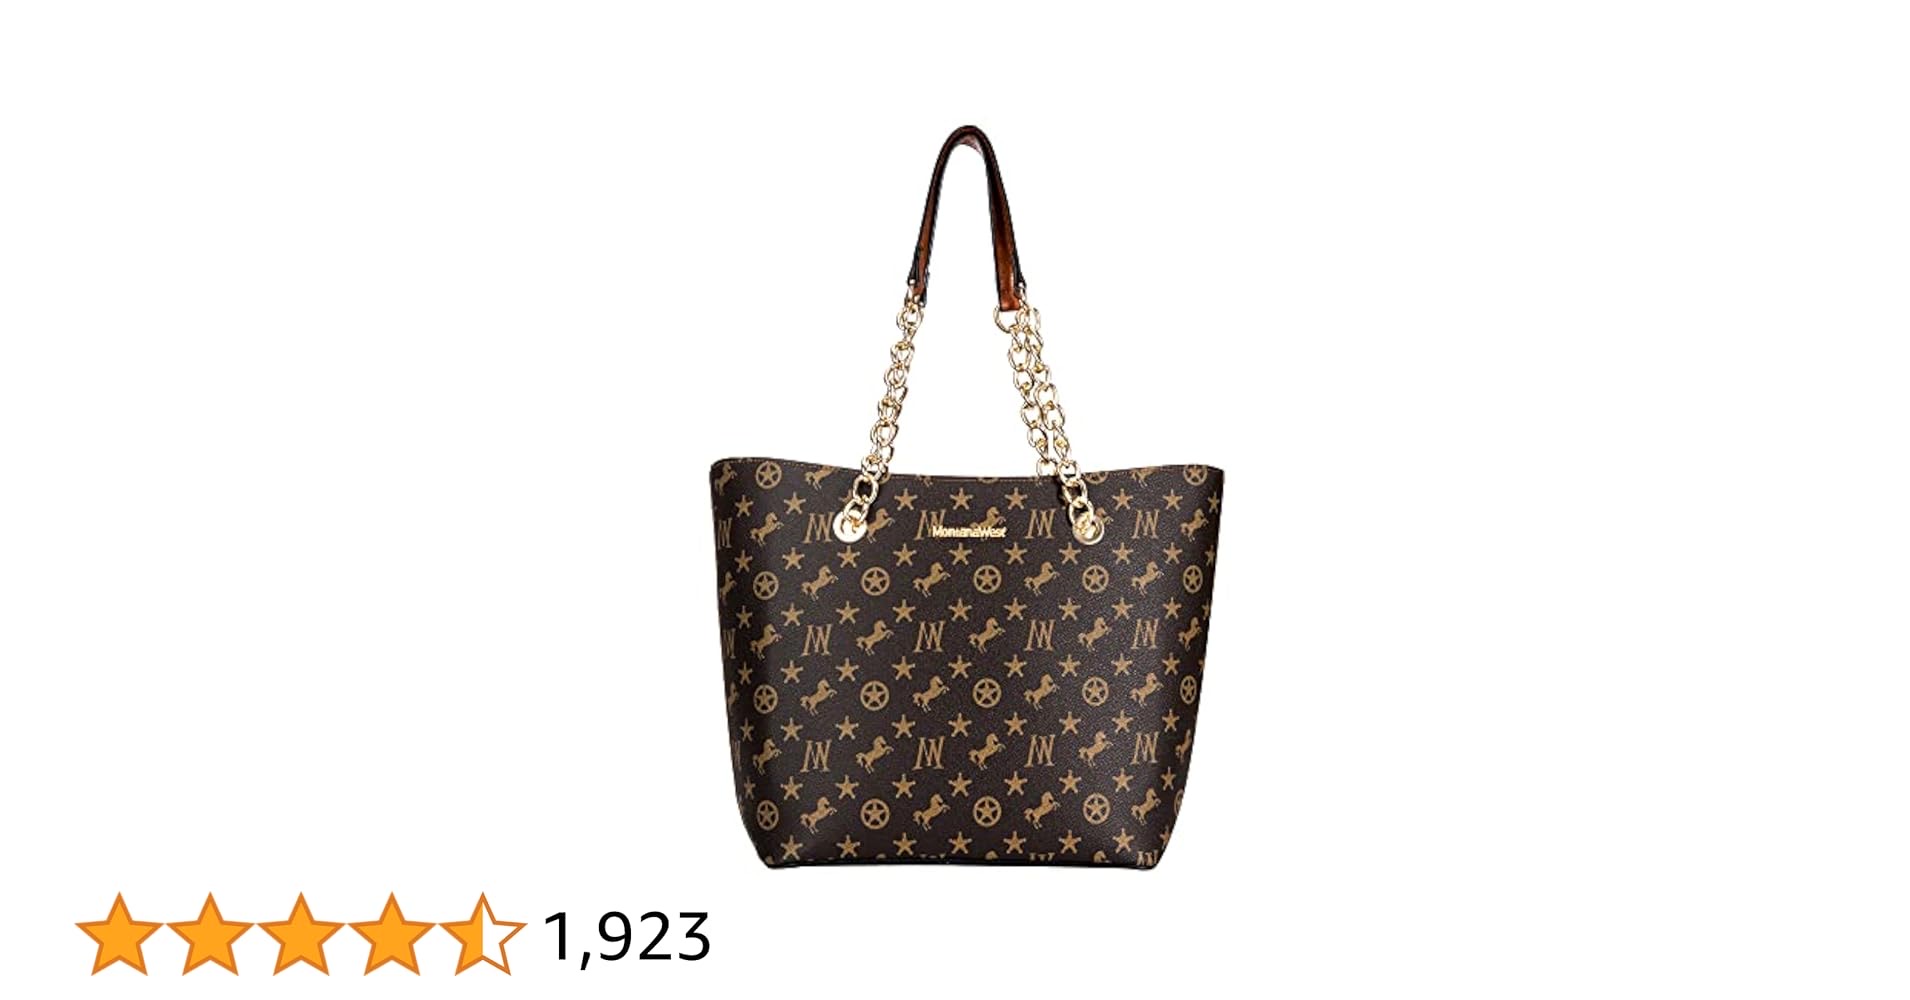 Montana West Purse and Handbags for Women Chain Shoulder Tote Bag 3折特价